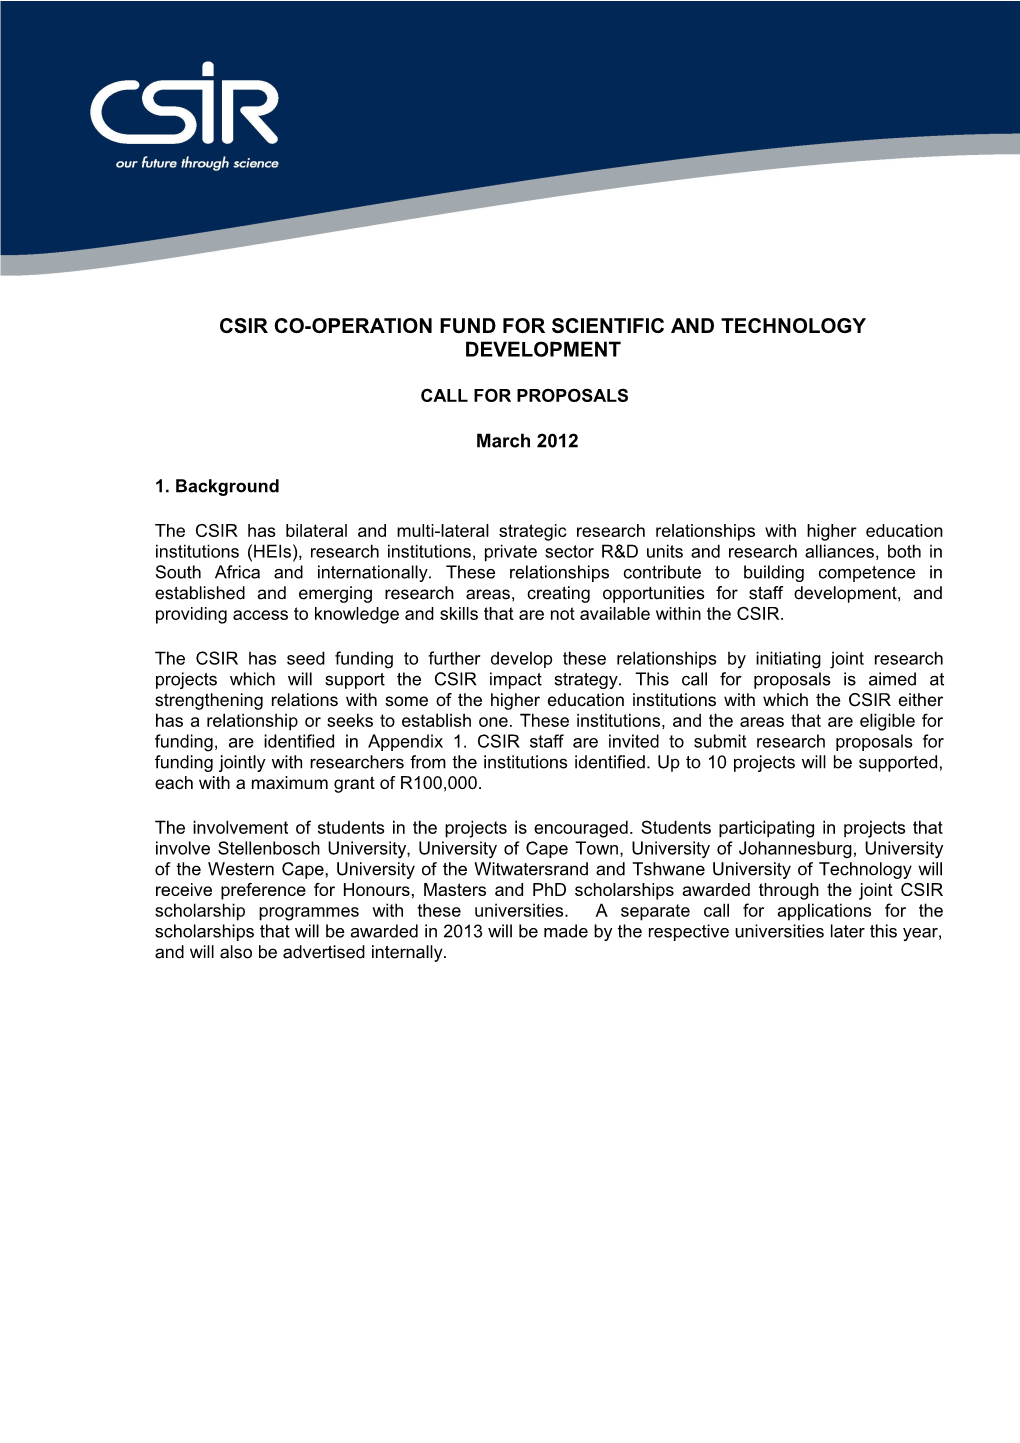 Csir Co-Operation Fund for Scientific and Technology Development